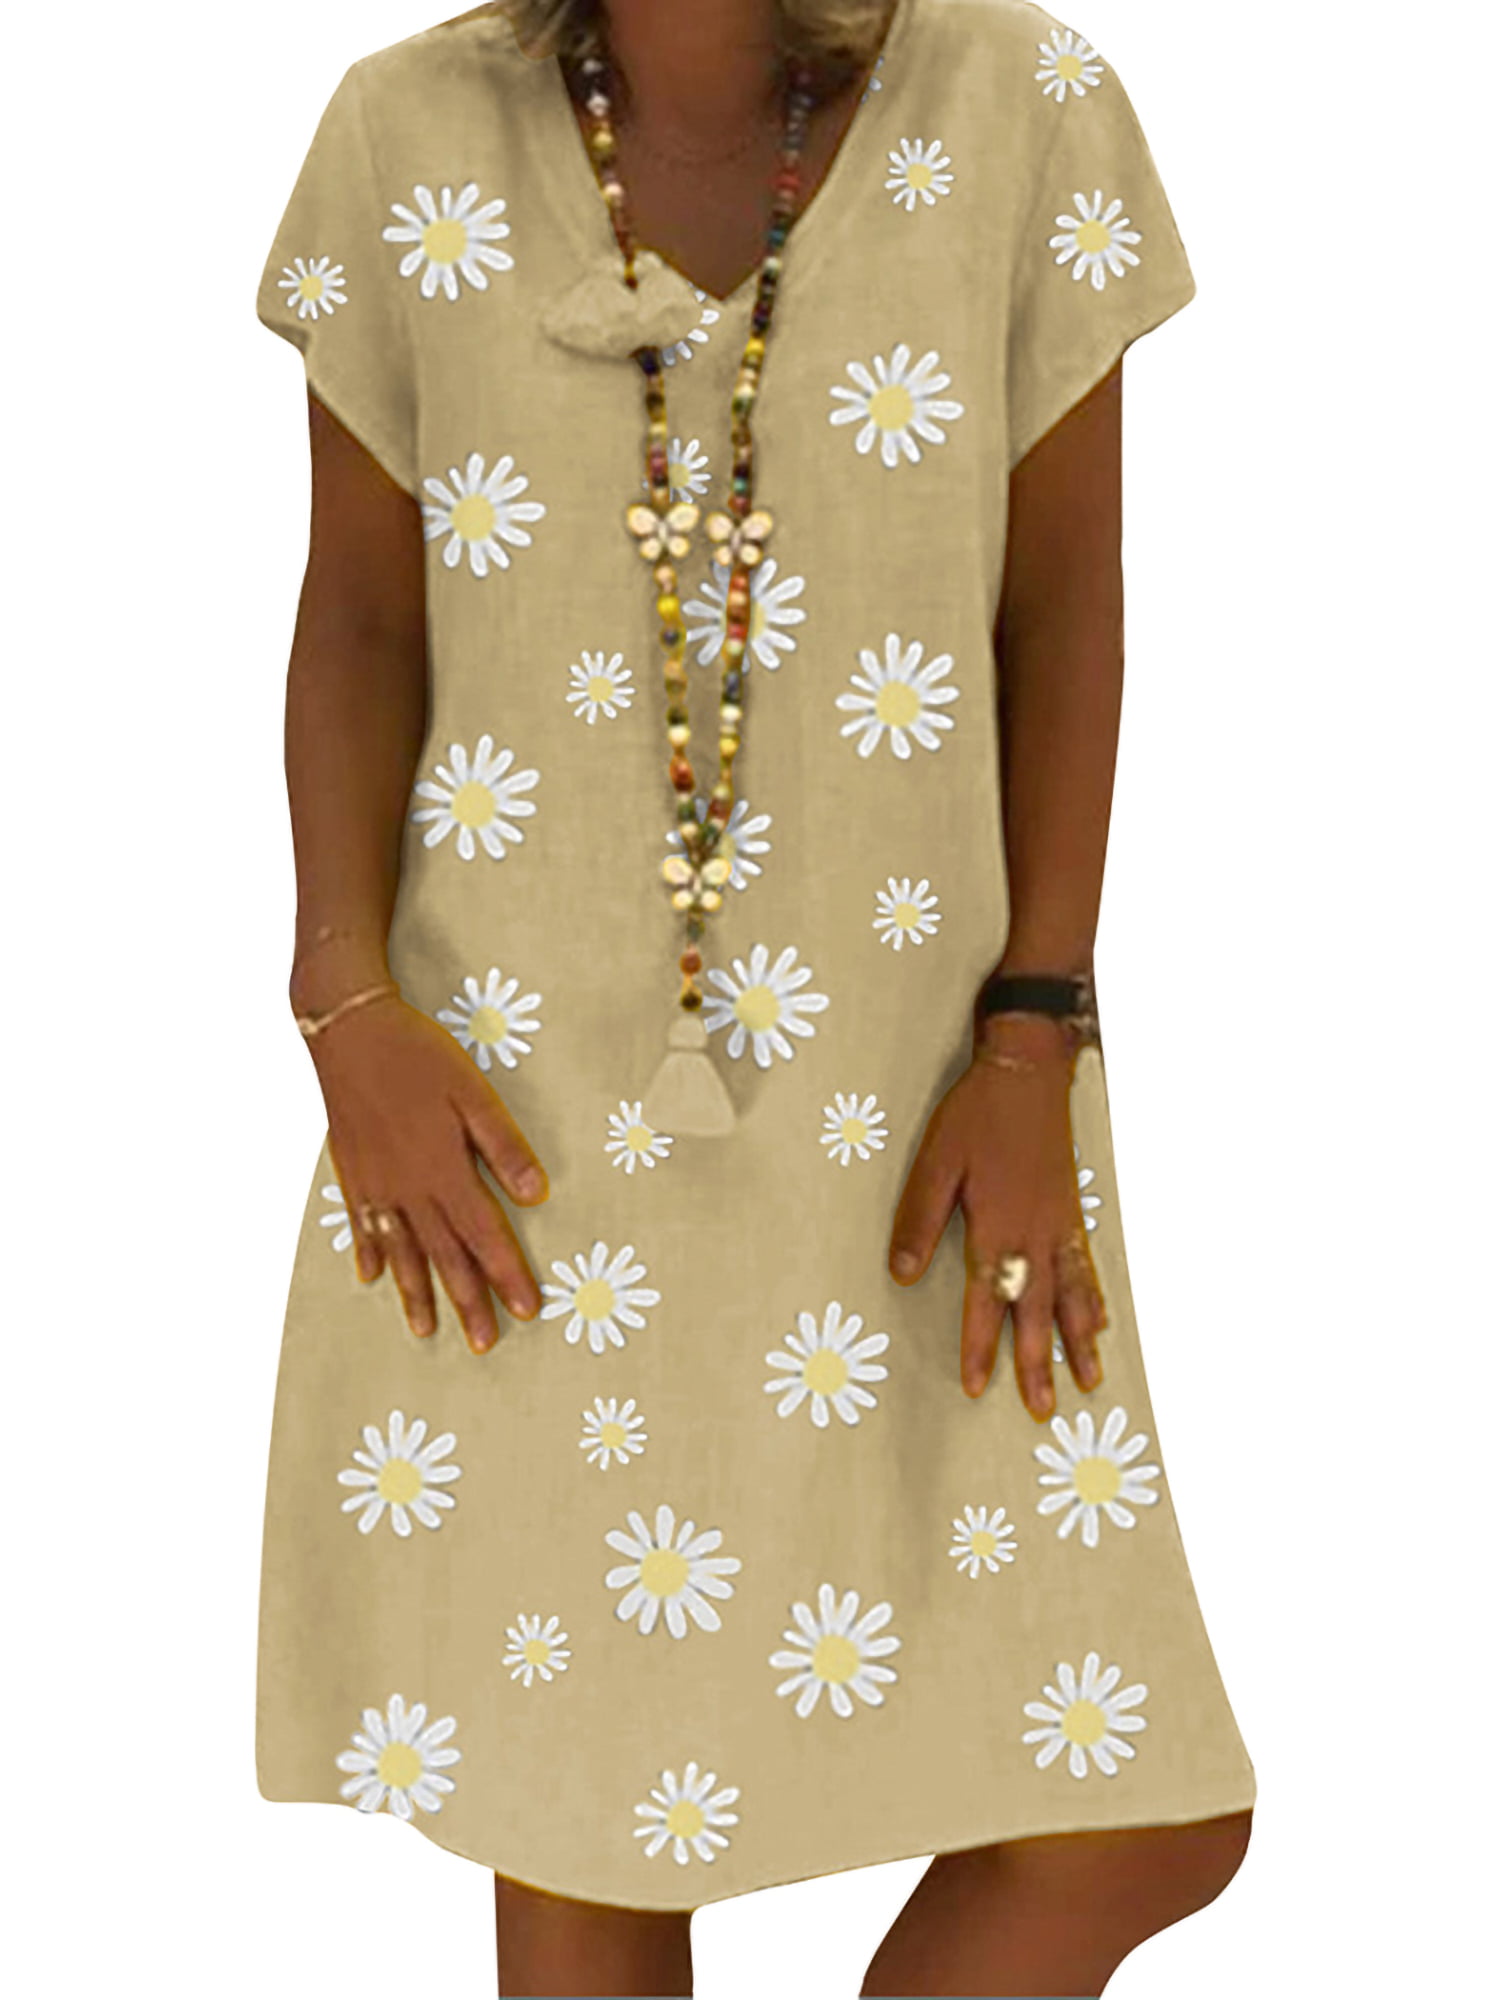 Women's African Vintage Print Dress with Pockets Half Sleeve V Neck Knee Length Gowns Casual Mini Dress Plus Size S-5XL